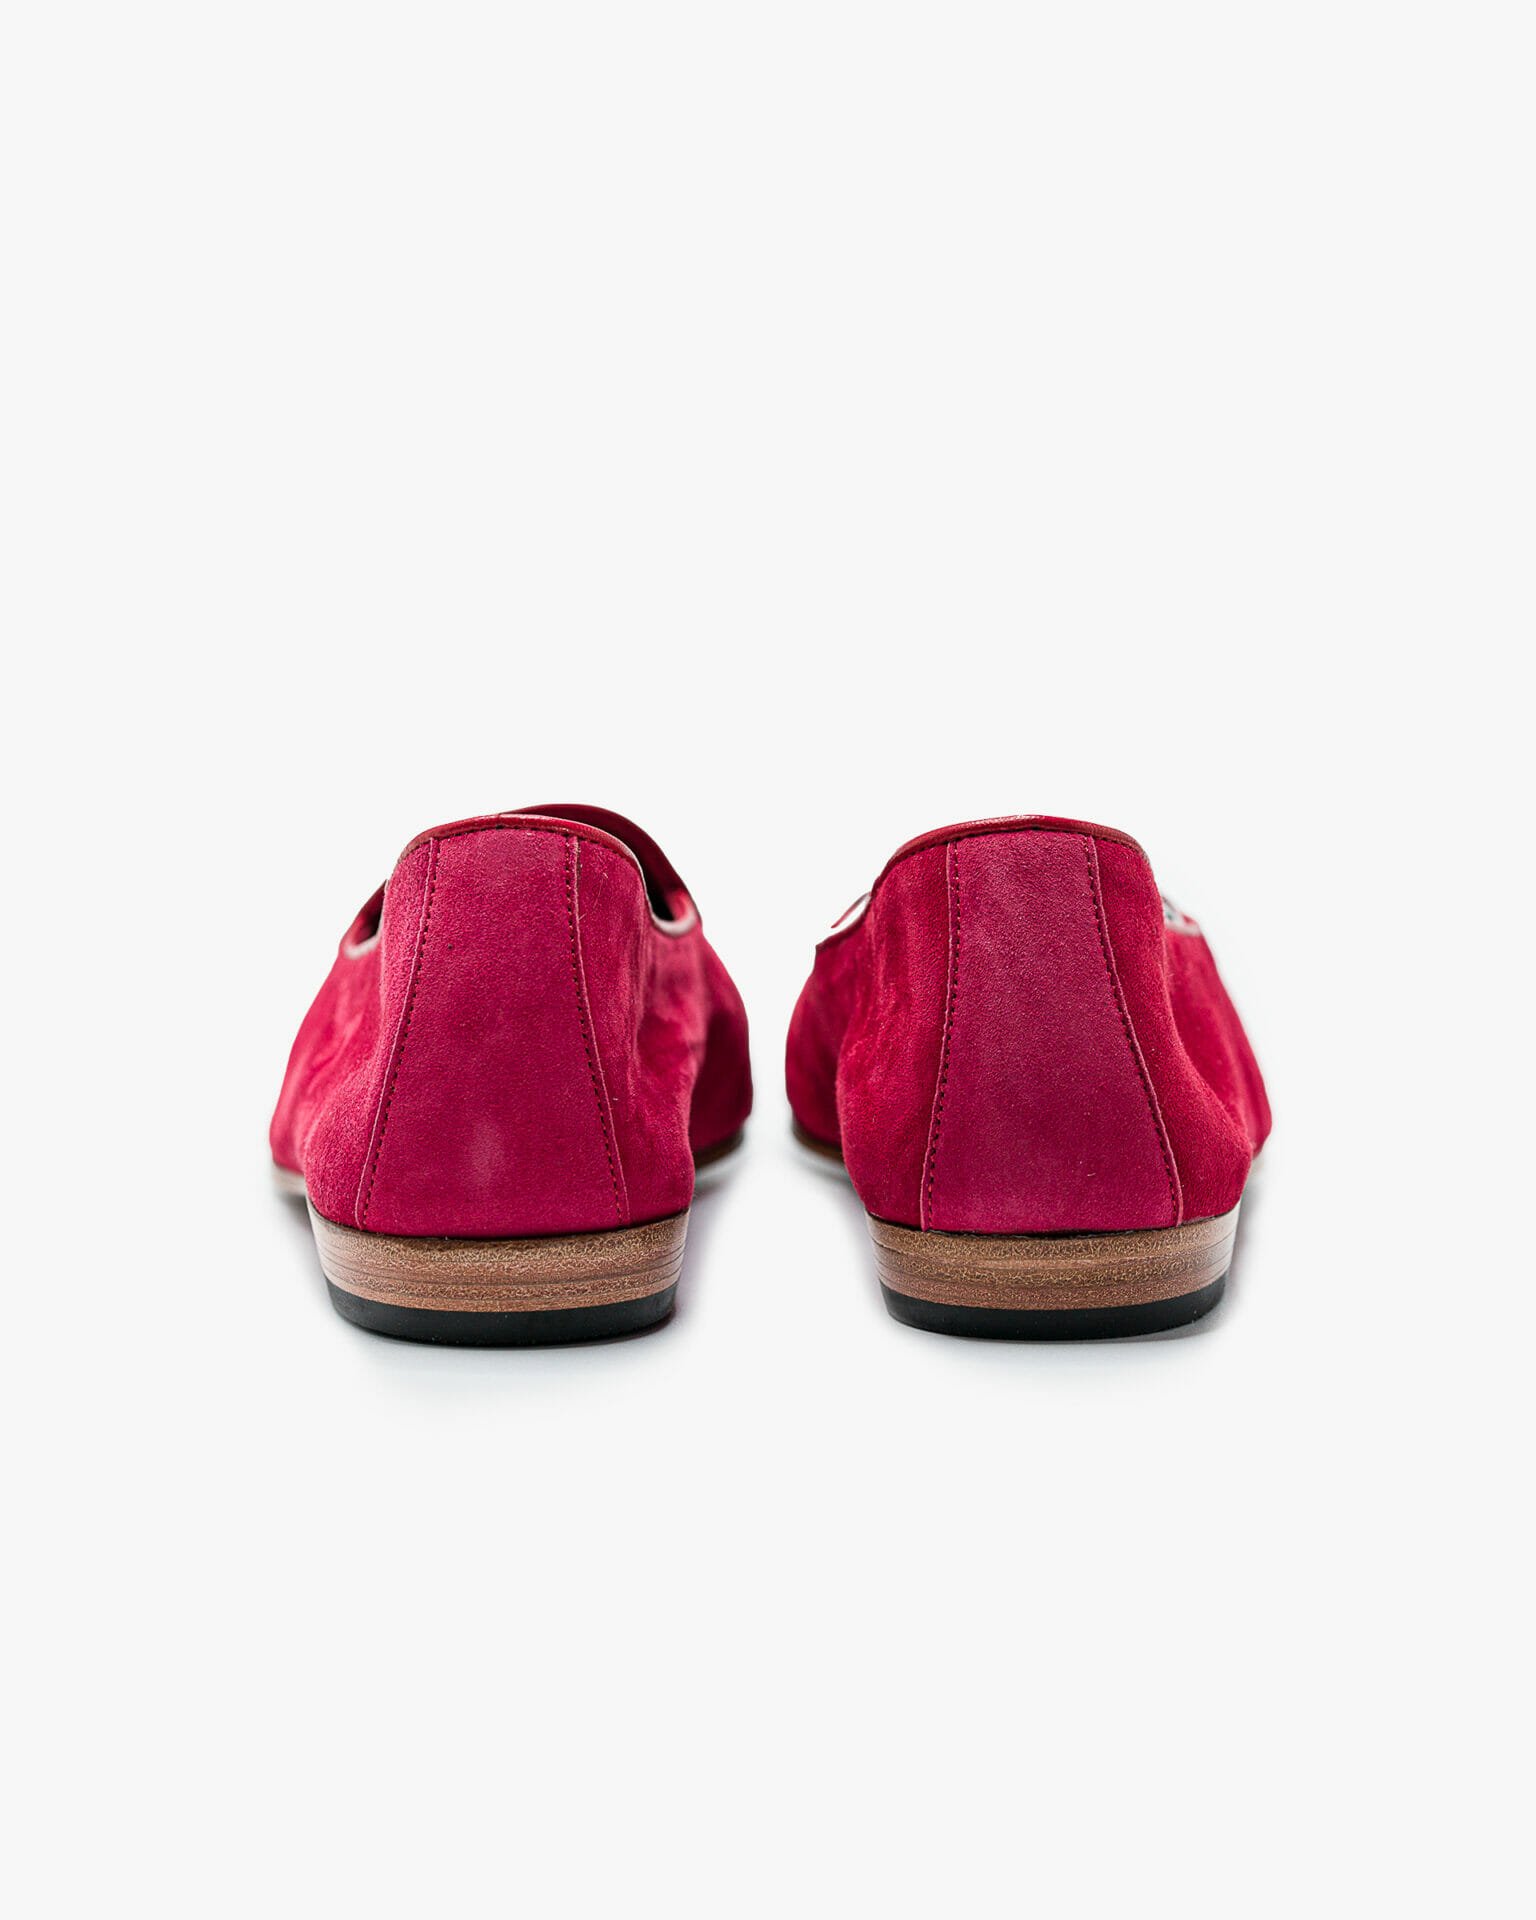 BELGIAN-D LS RUBY RED SUEDE LOAFERS FOR WOMEN - Andrea Ventura Firenze